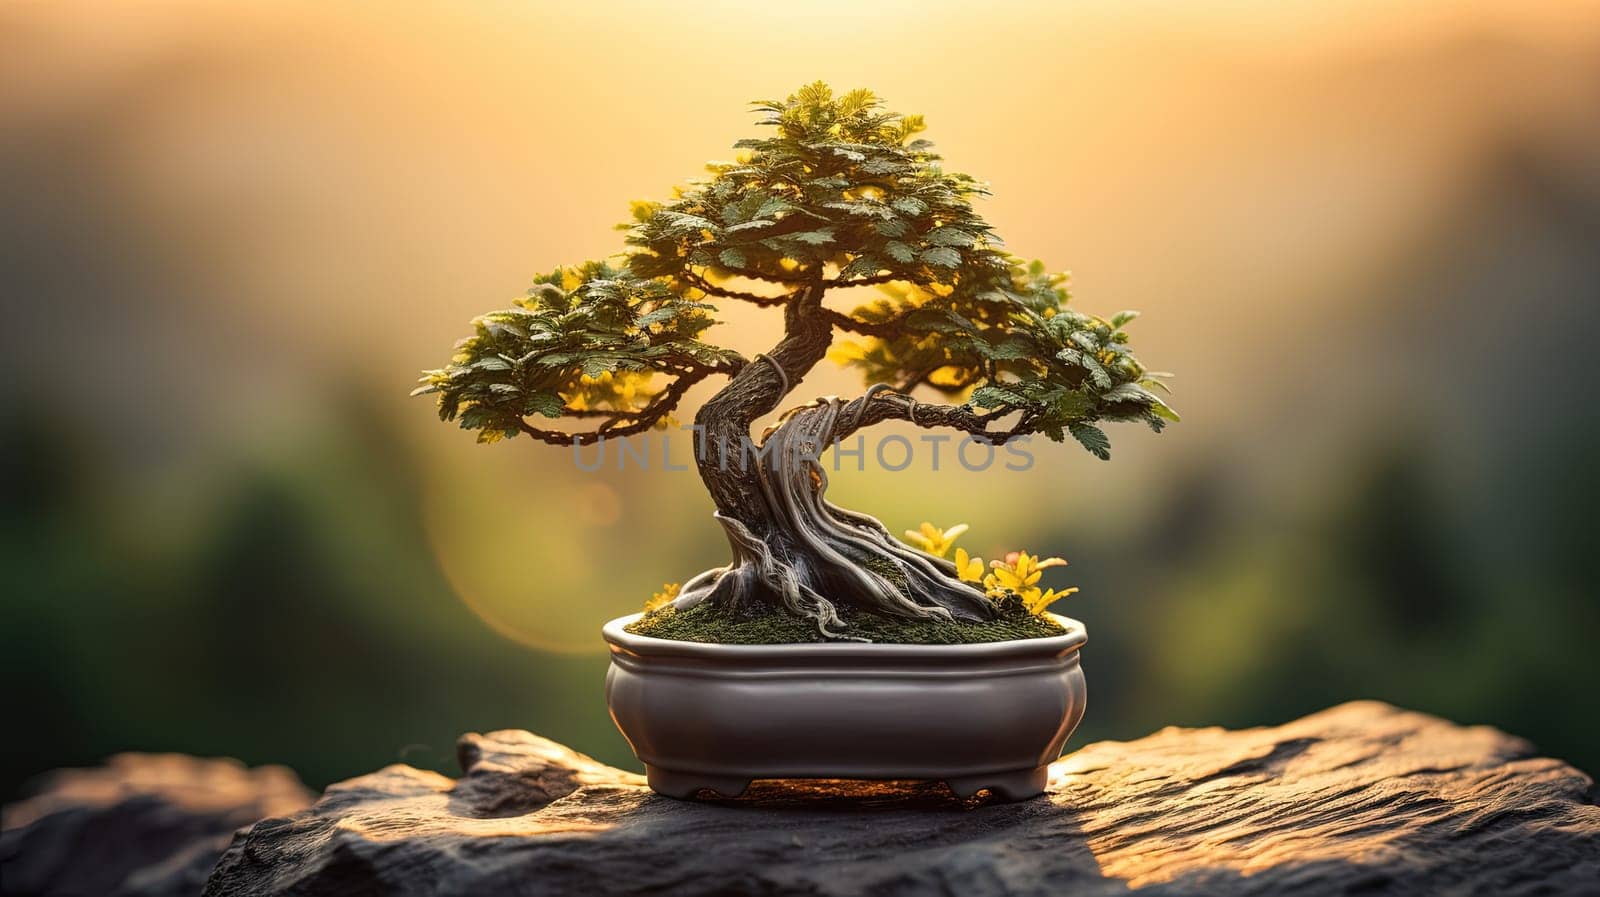 A meticulously pruned bonsai tree in small ceramic pot, bathed in soft morning light that accentuates